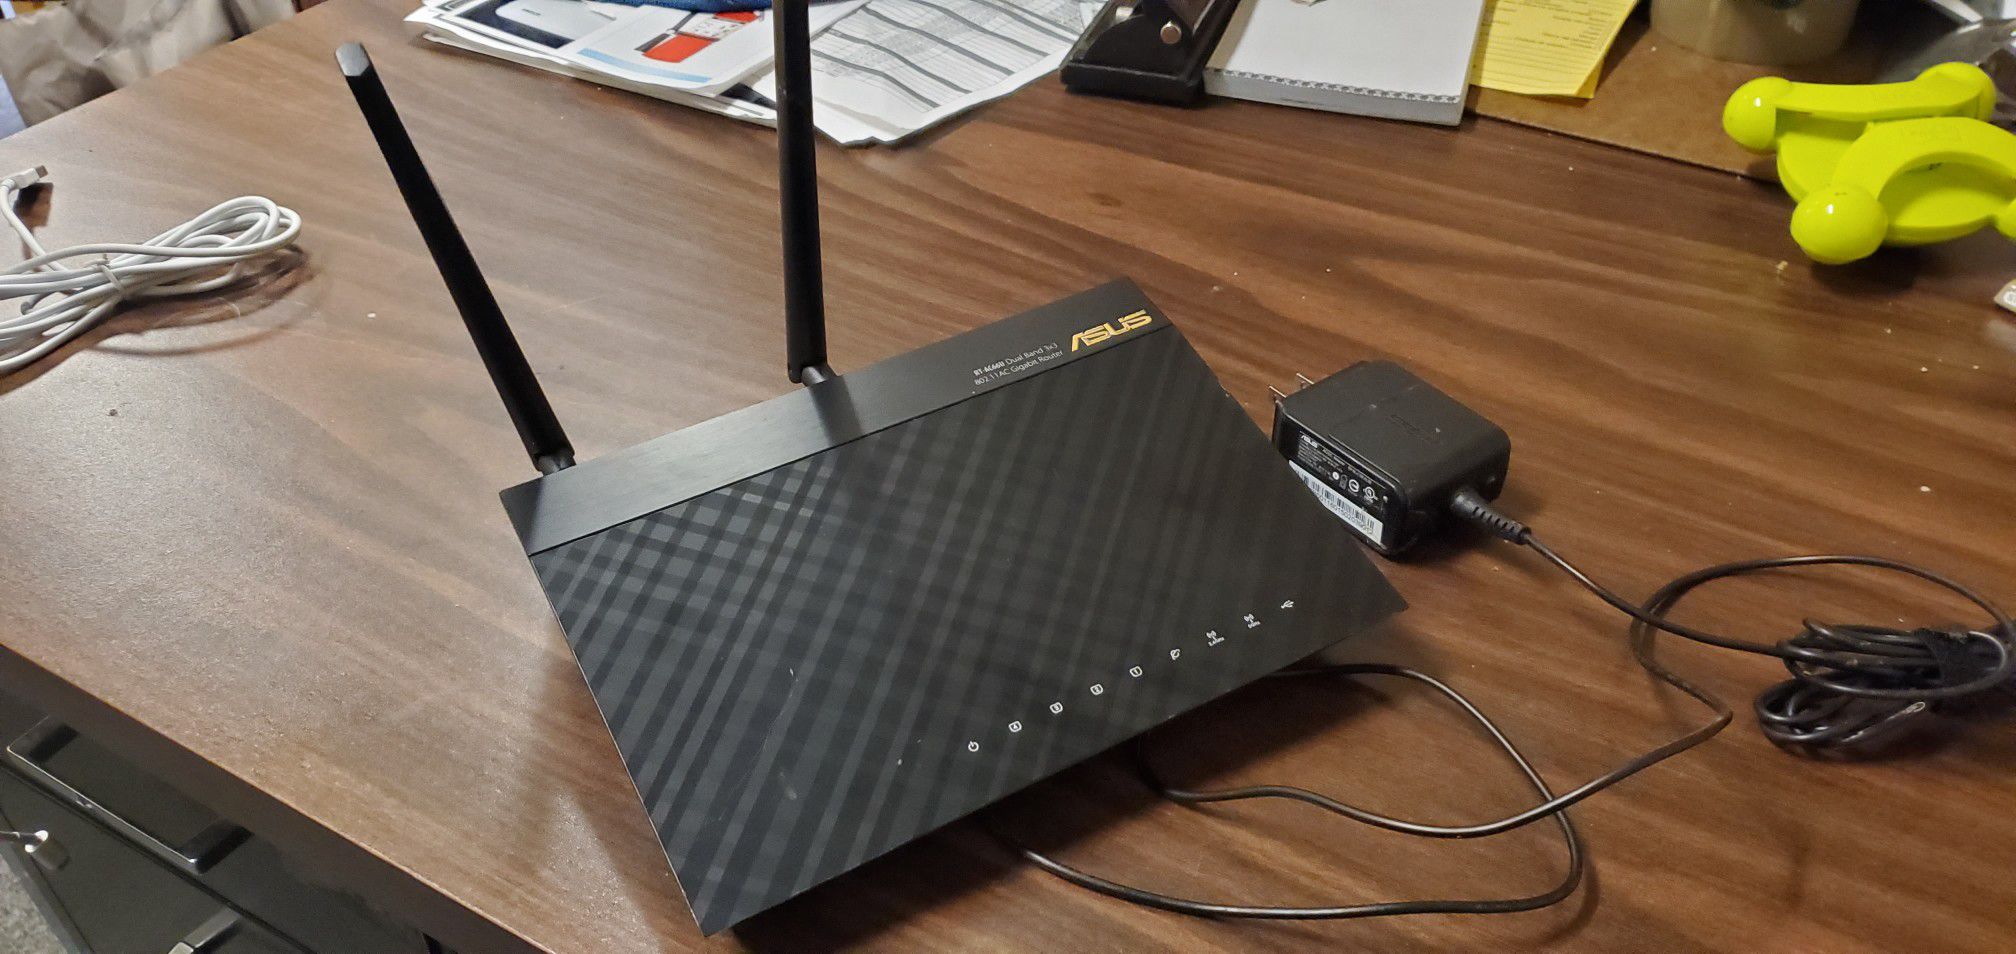 Dual band Asus router